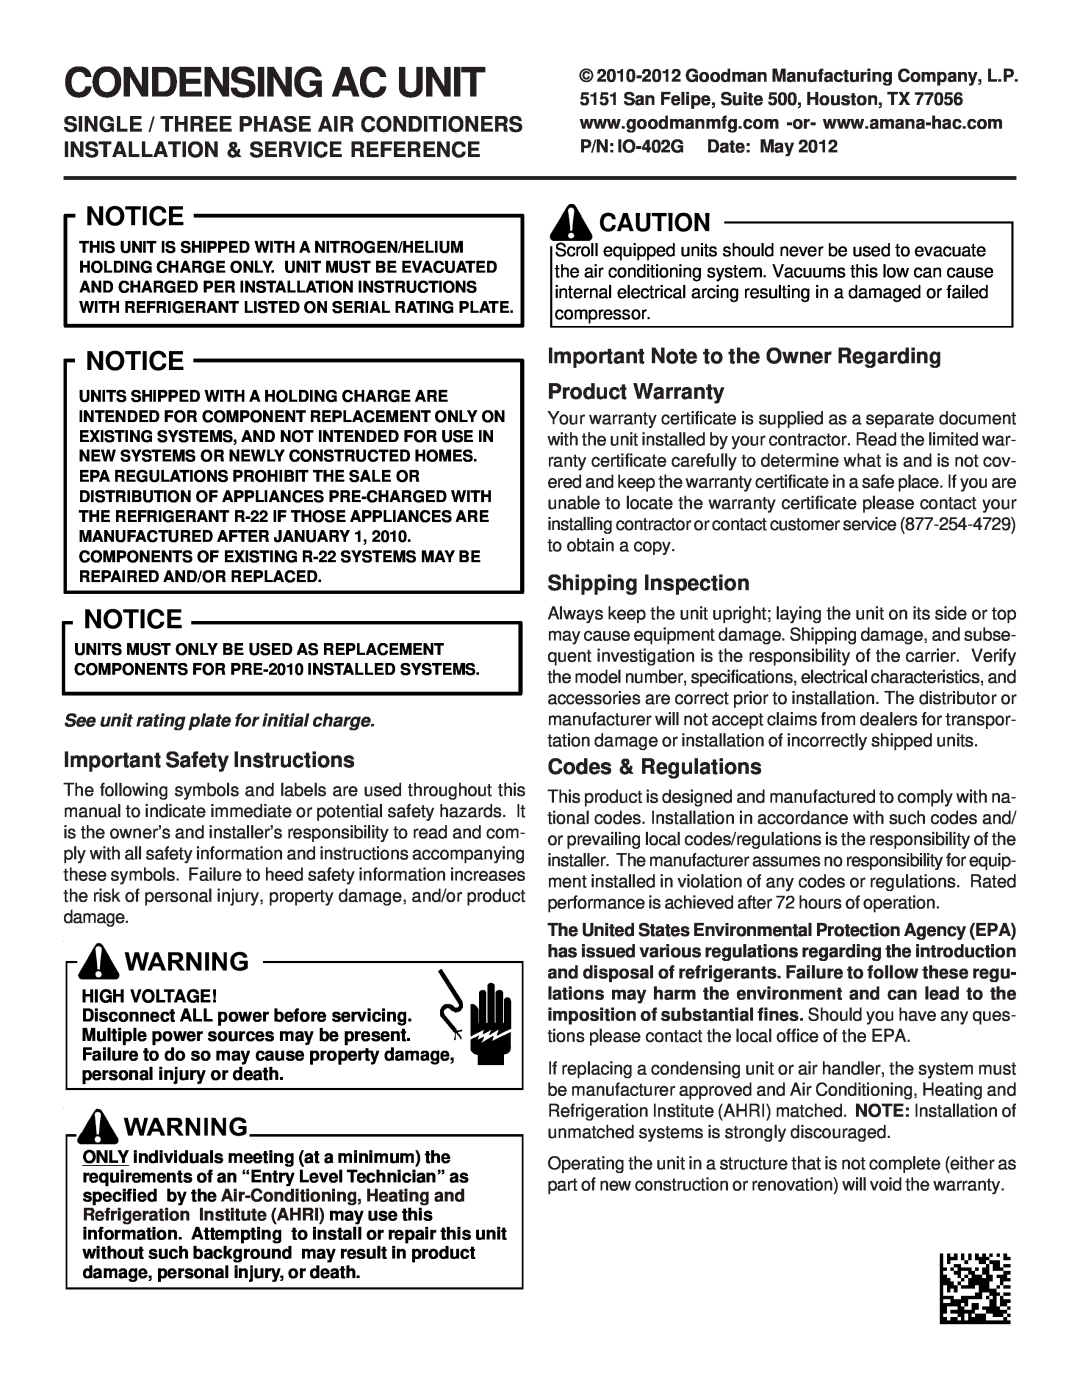 Goodman Mfg CONDENSING AC UNIT SINGLE / THREE PHASE AIR CONDITIONERS important safety instructions Shipping Inspection 